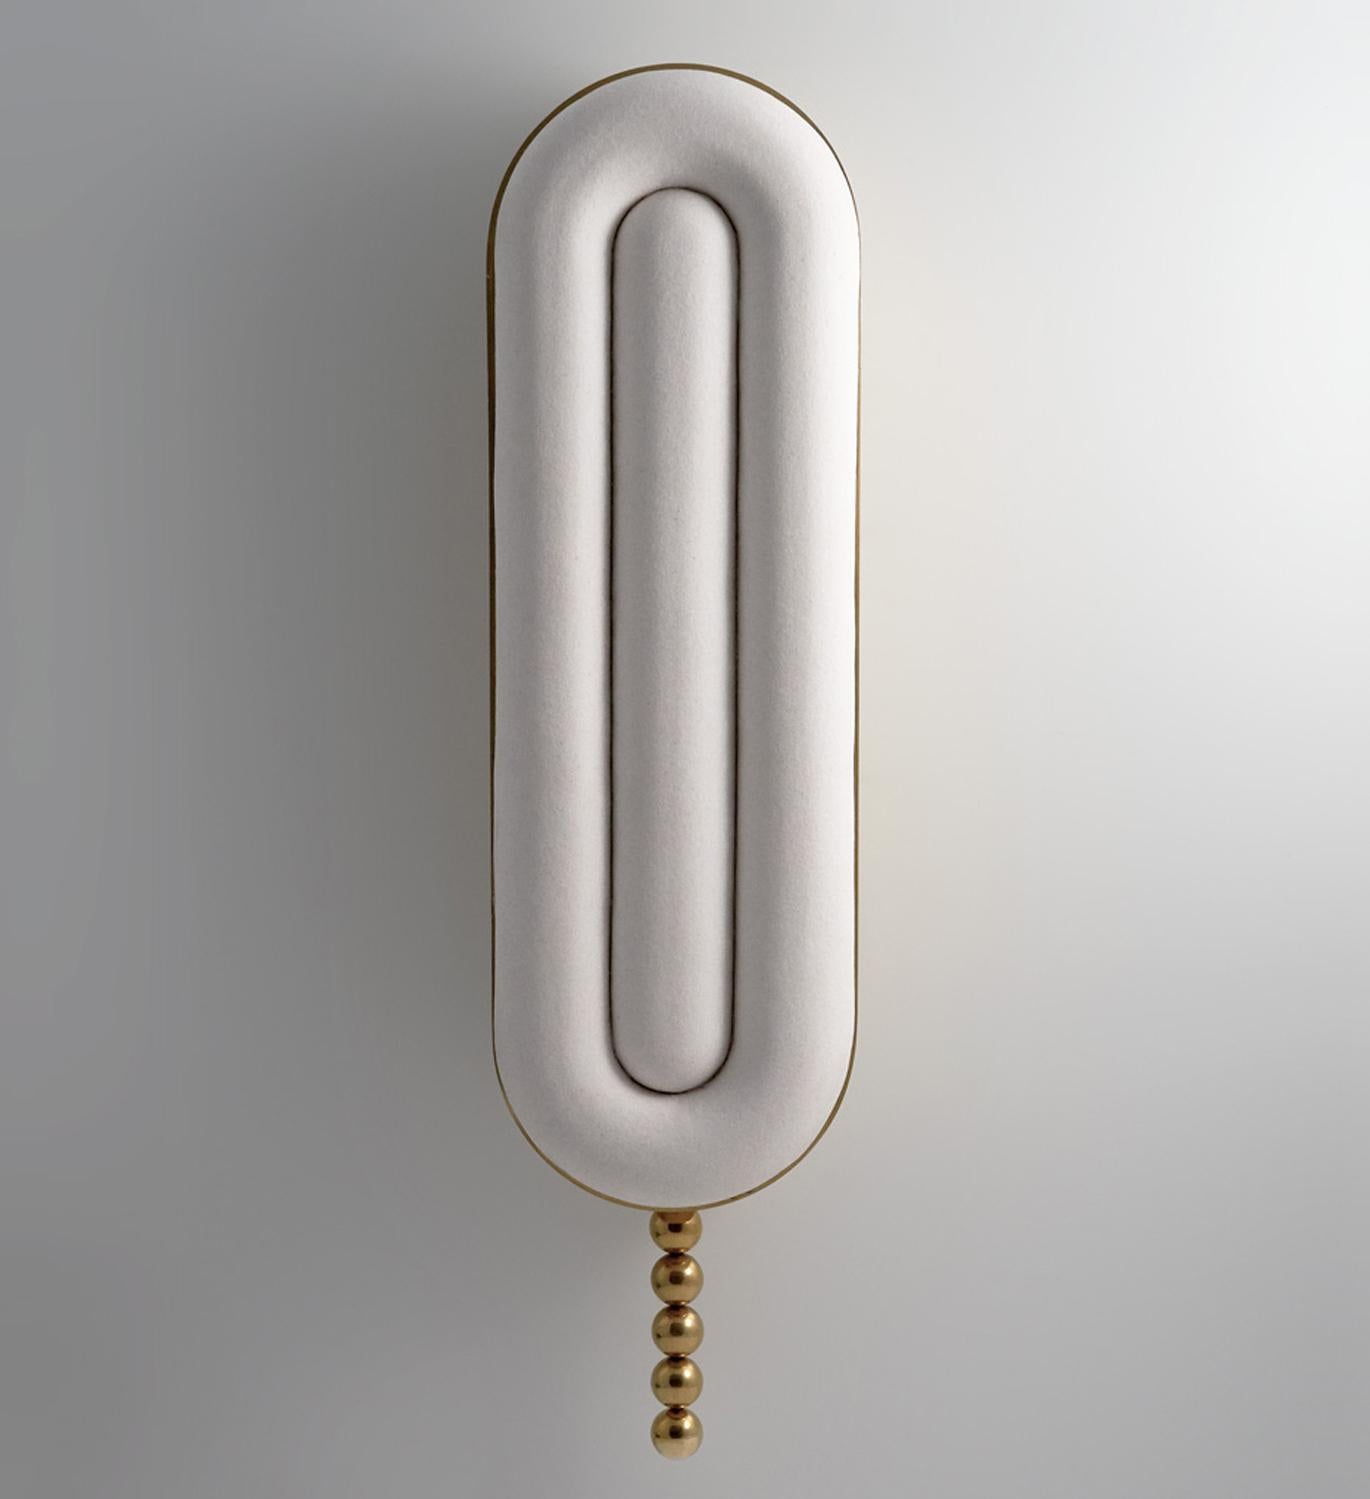 Manufactured in Manhattan, the Nº159 Wall Lamp is constructed from a solid brass frame, porcelain slip cast lens, LED illumination and a grand pull chain. Collection Nº1 / Tripartite from Avoirdupois is the visual division of three. Every piece